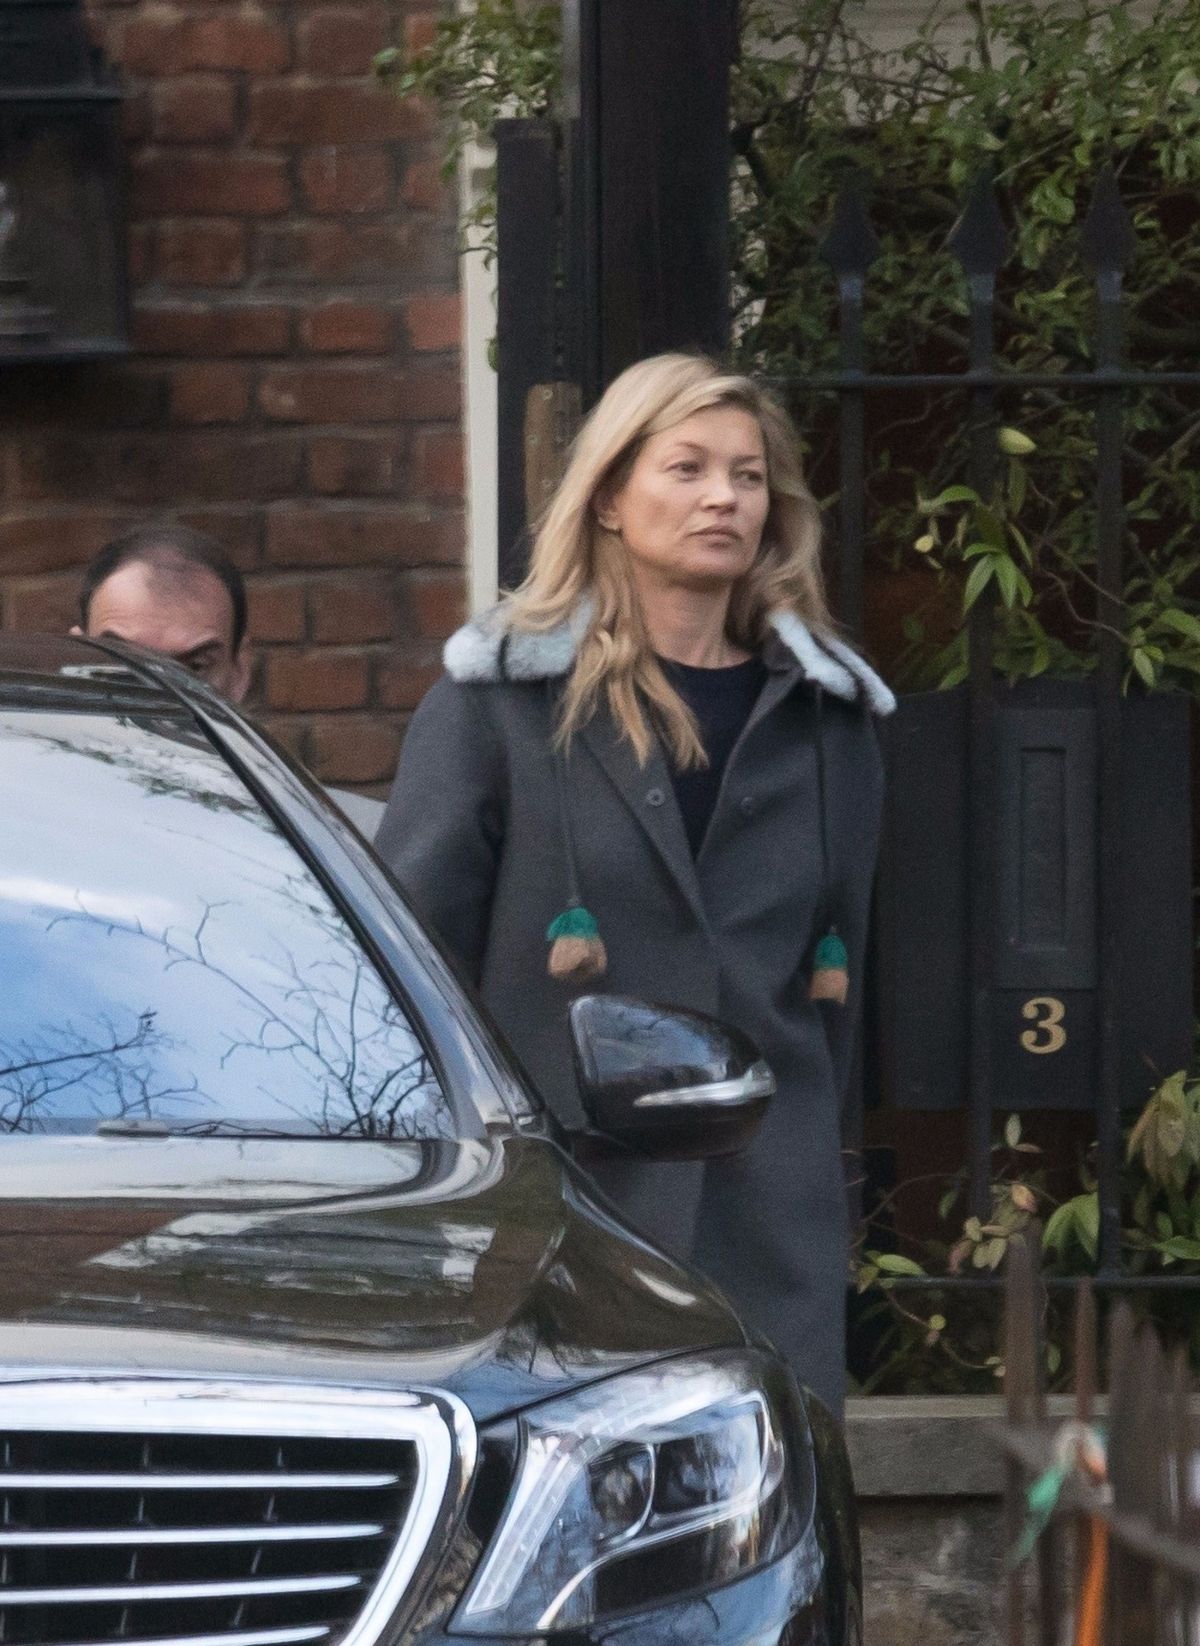 kate-moss-leaves-her-home-in-london-11-2